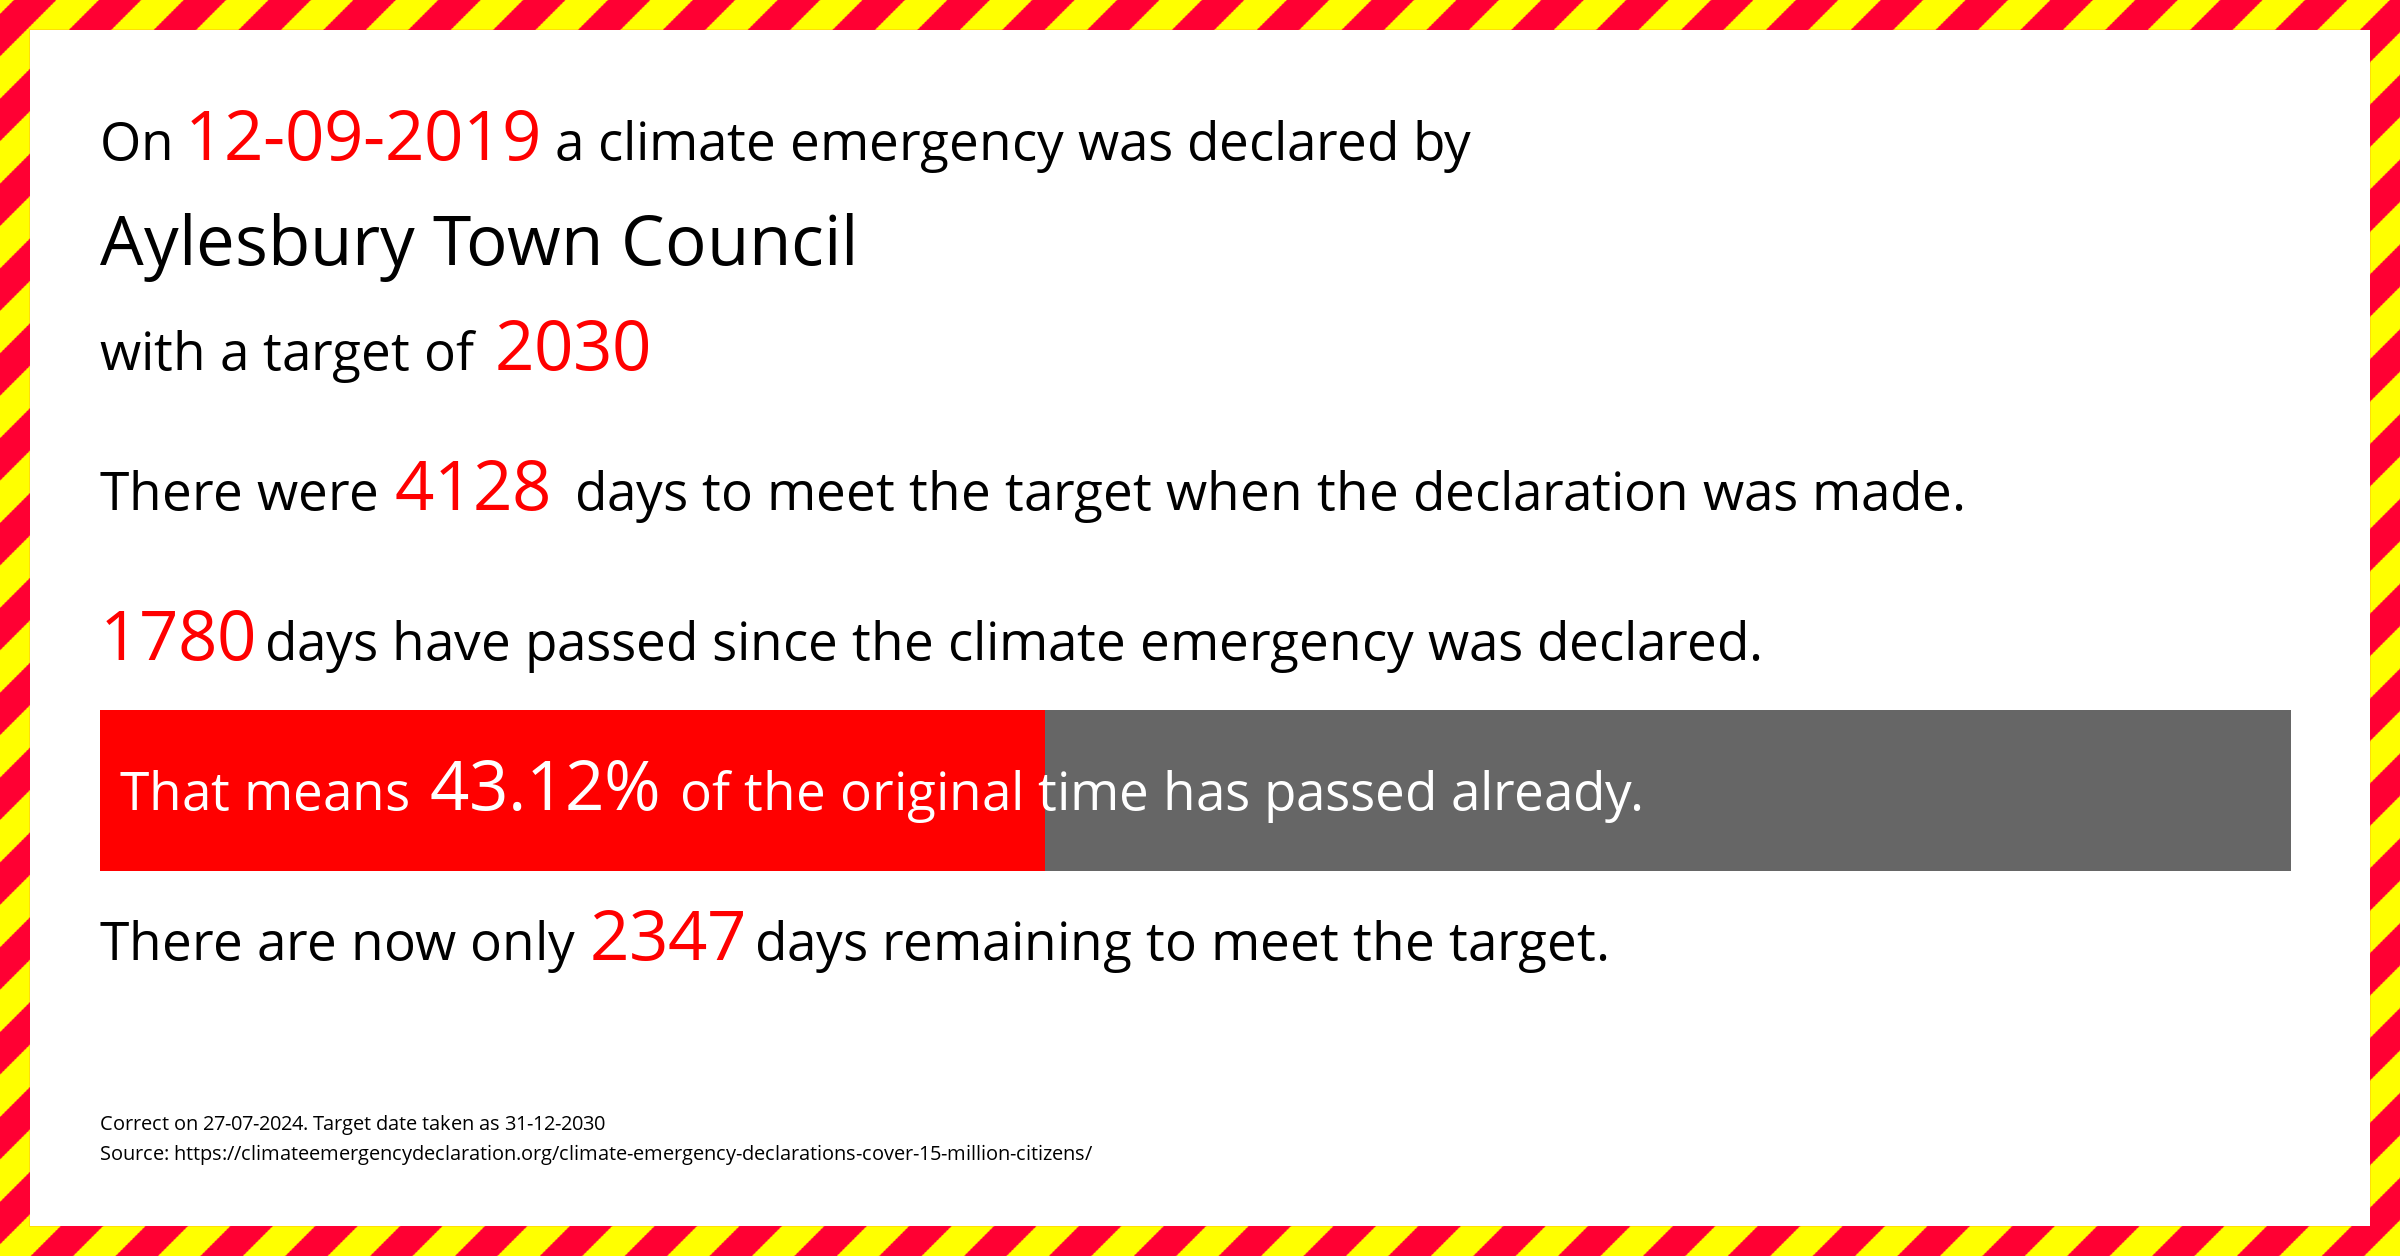 Aylesbury Town Council declared a Climate emergency on Thursday 12th September 2019, with a target of 2030.